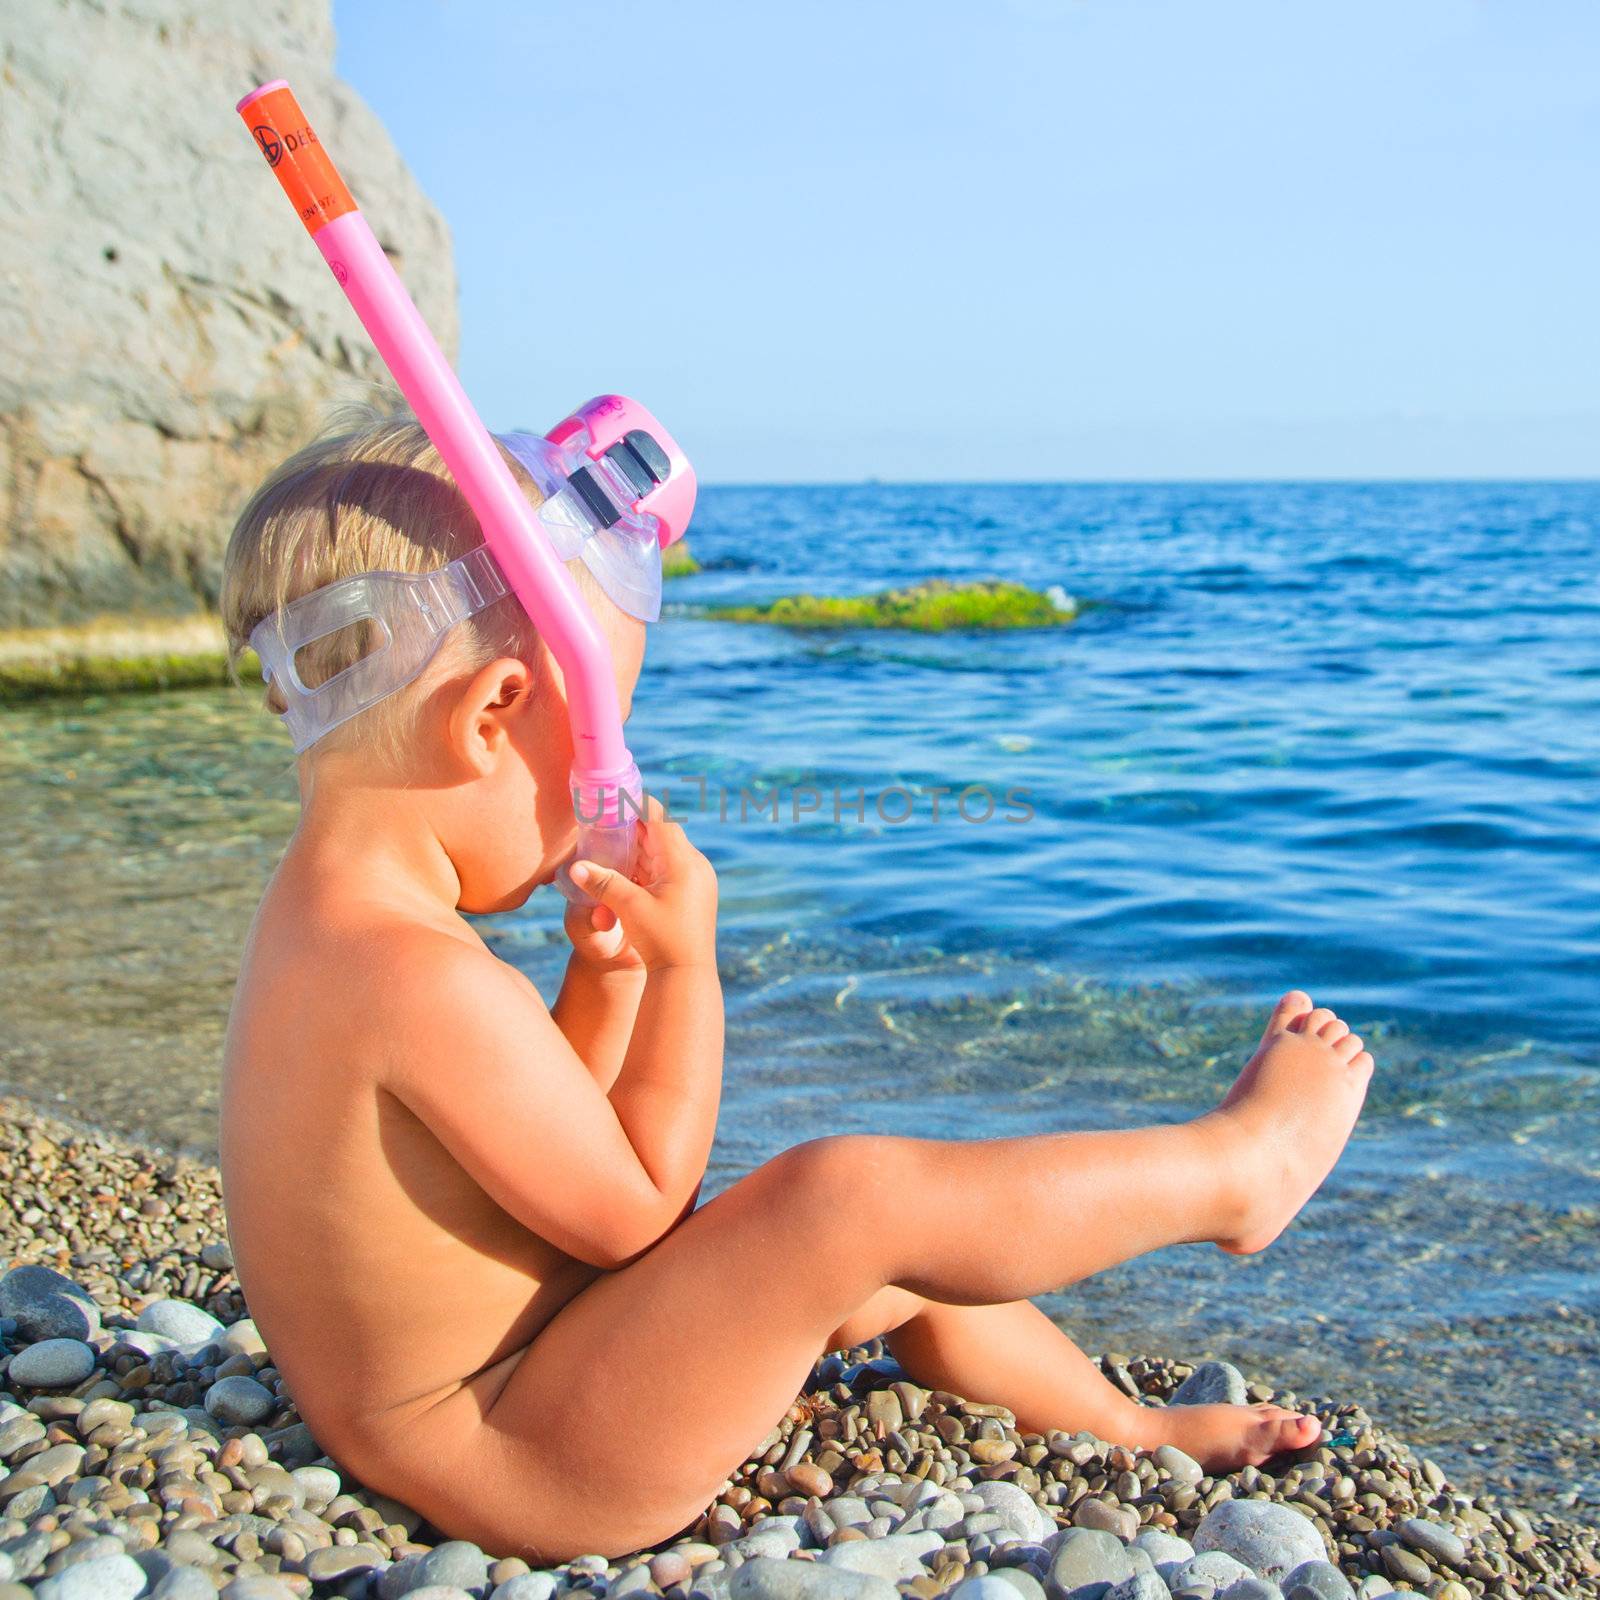 Baby boy on beach with snorkles ready to have a good time swimming